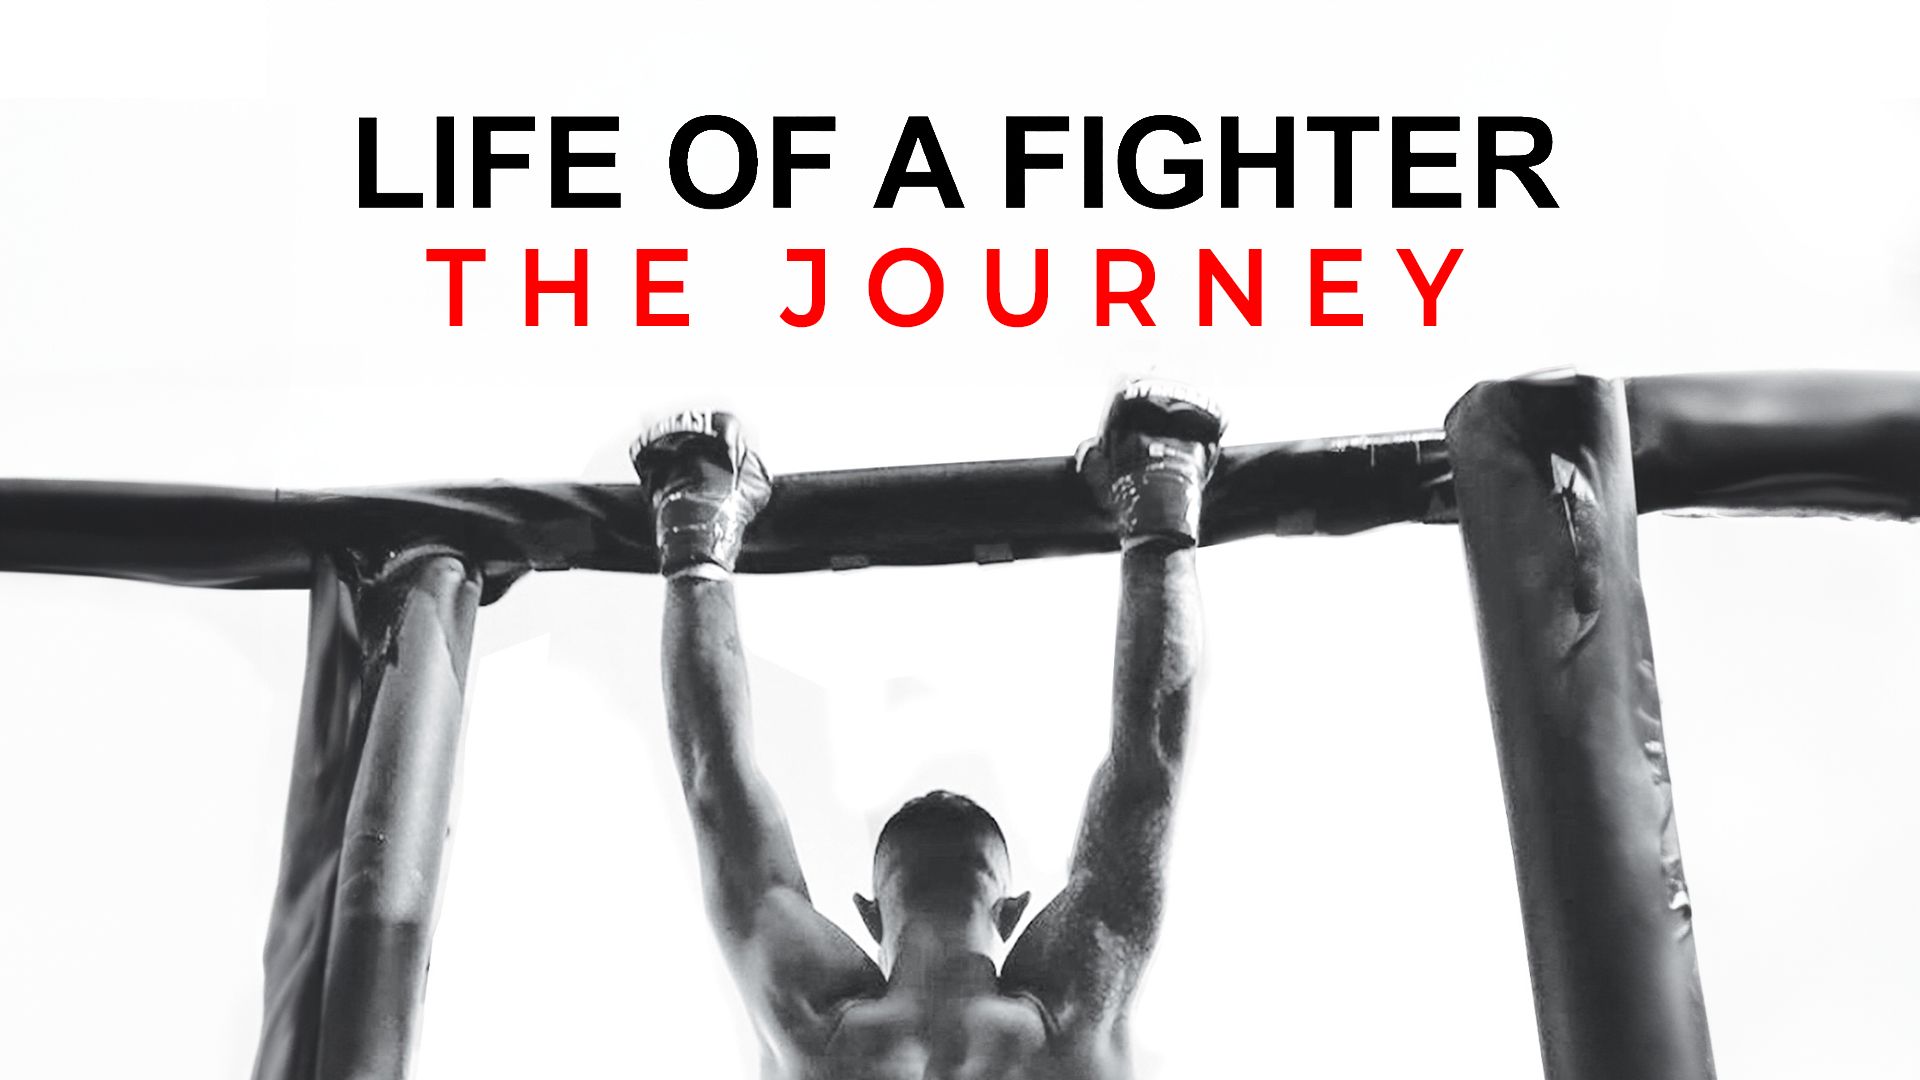 Life of a Fighter: The Journey